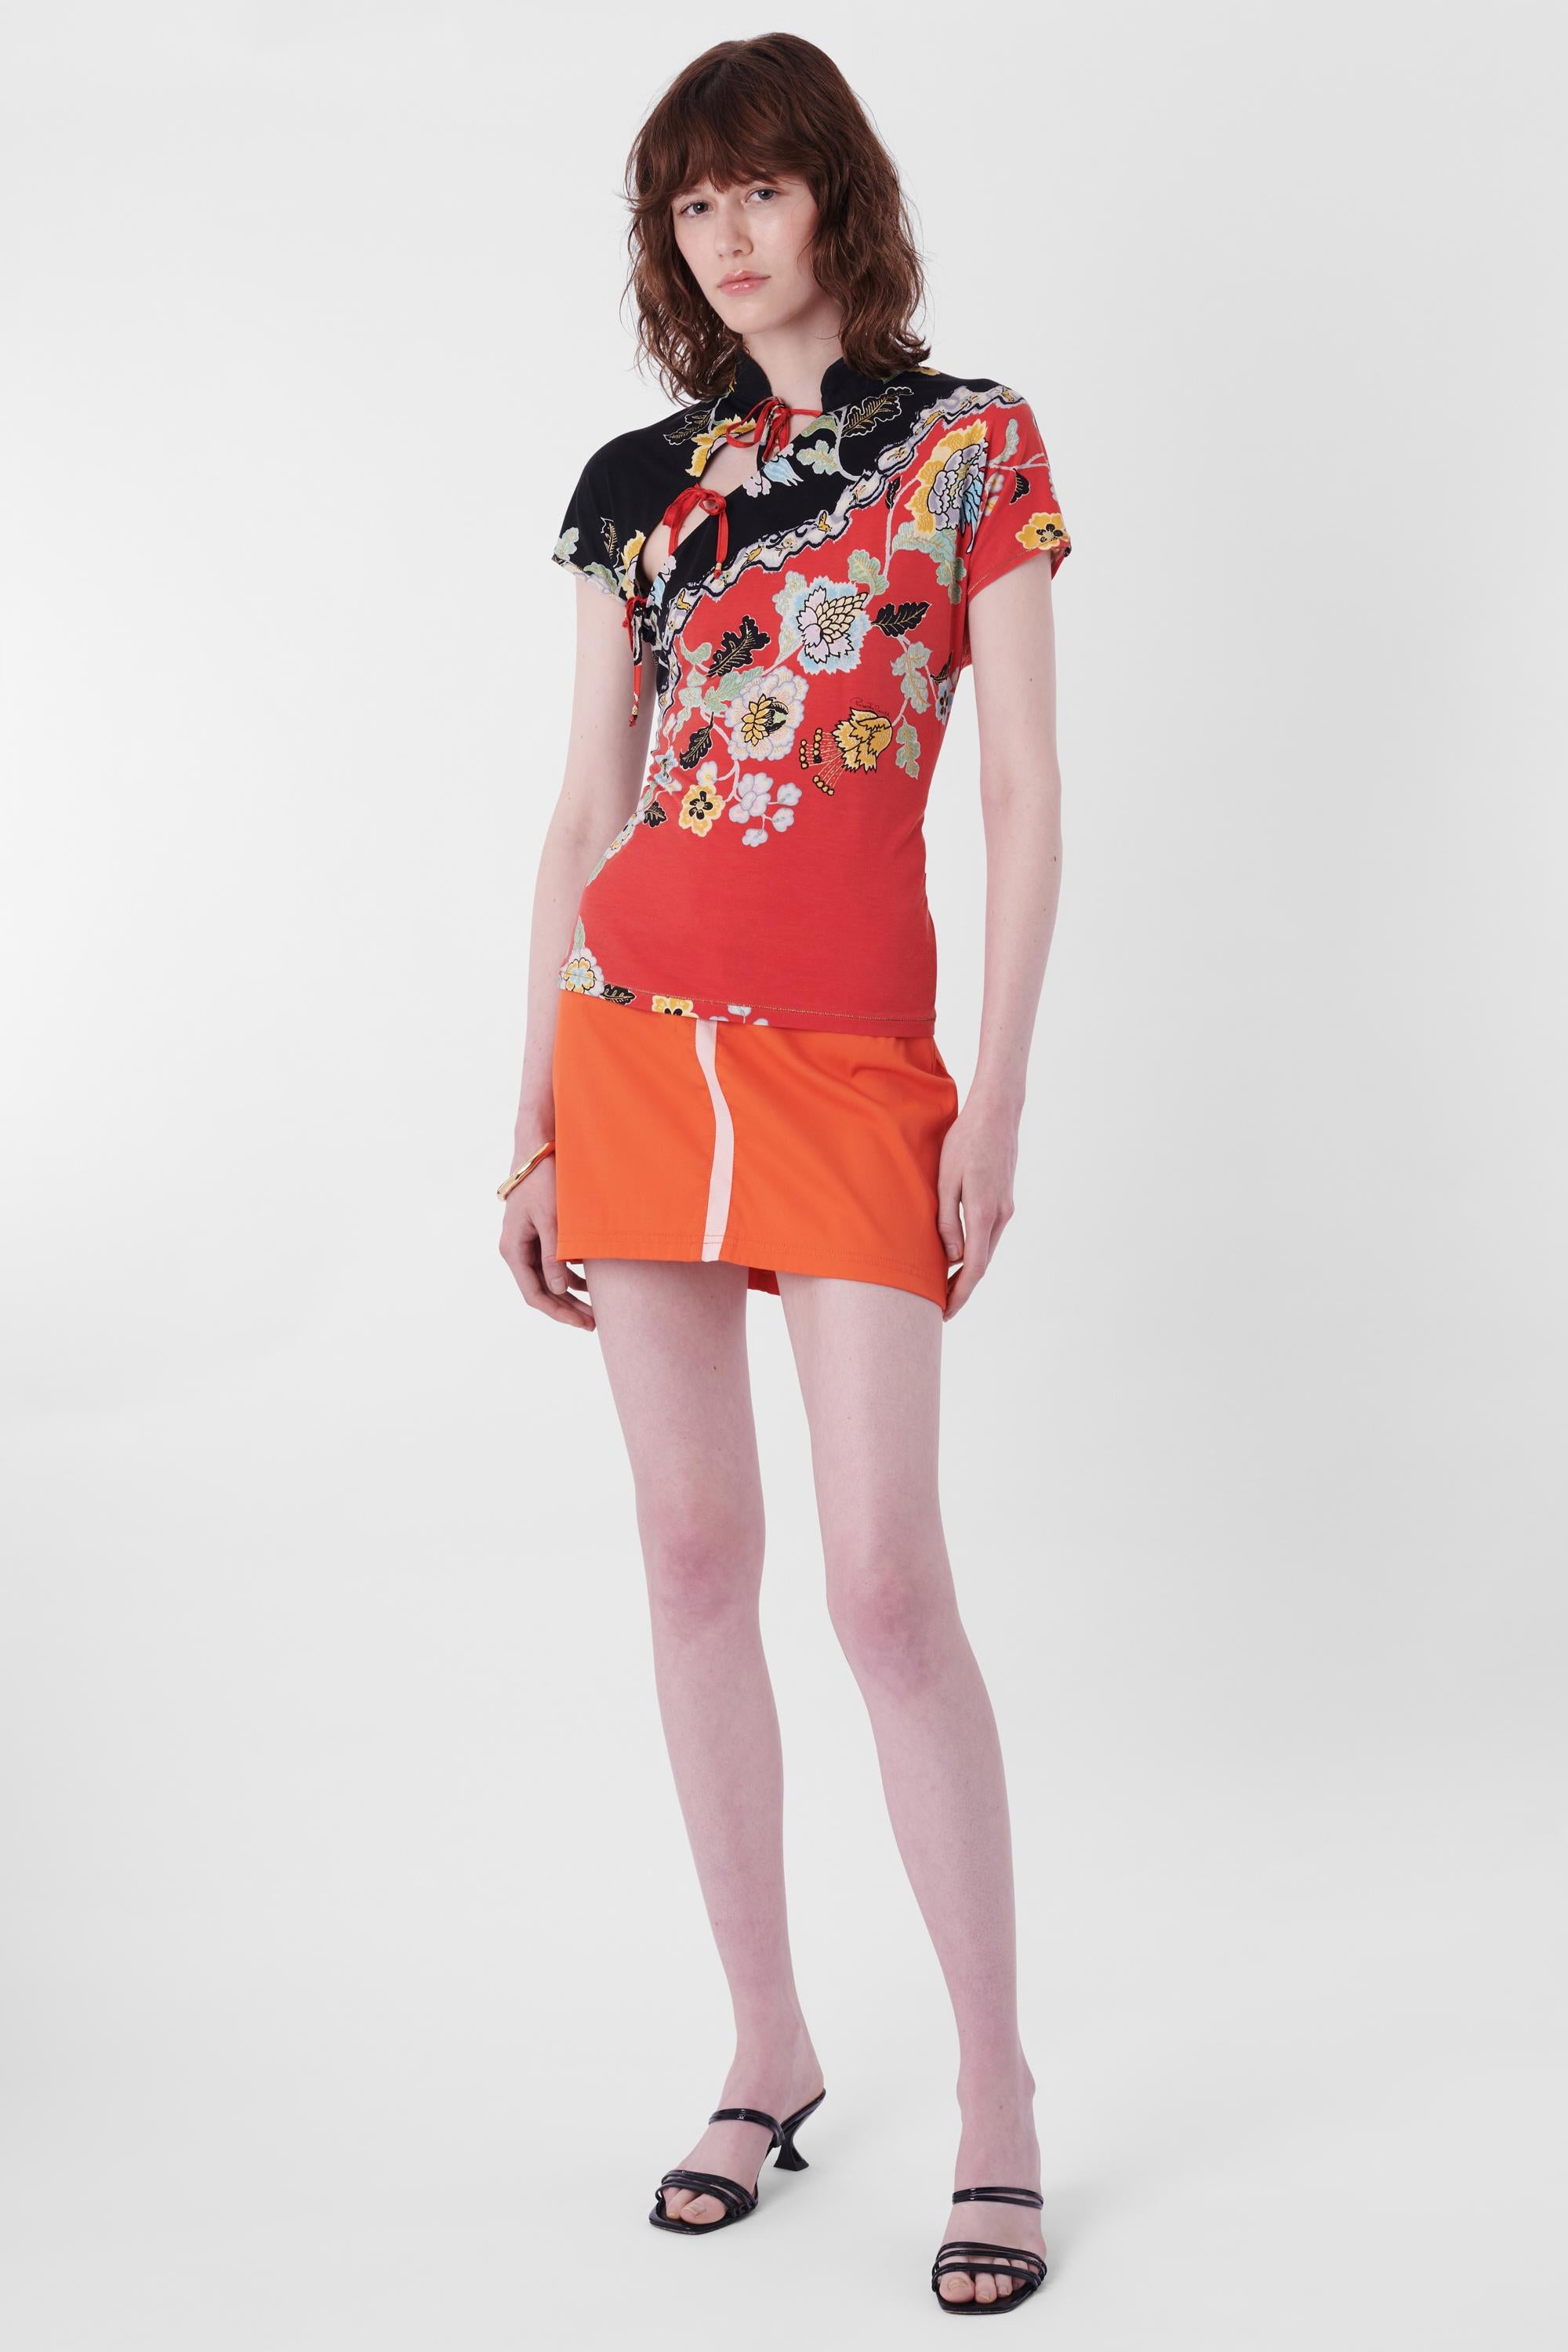 Roberto Cavalli S/S 2003 Chinoiserie Short Sleeve Top. Features mandarin collar and tie ribbon details along side. In excellent vintage condition.

Brand: Roberto Cavalli
Size: UK 10
Color: Multi